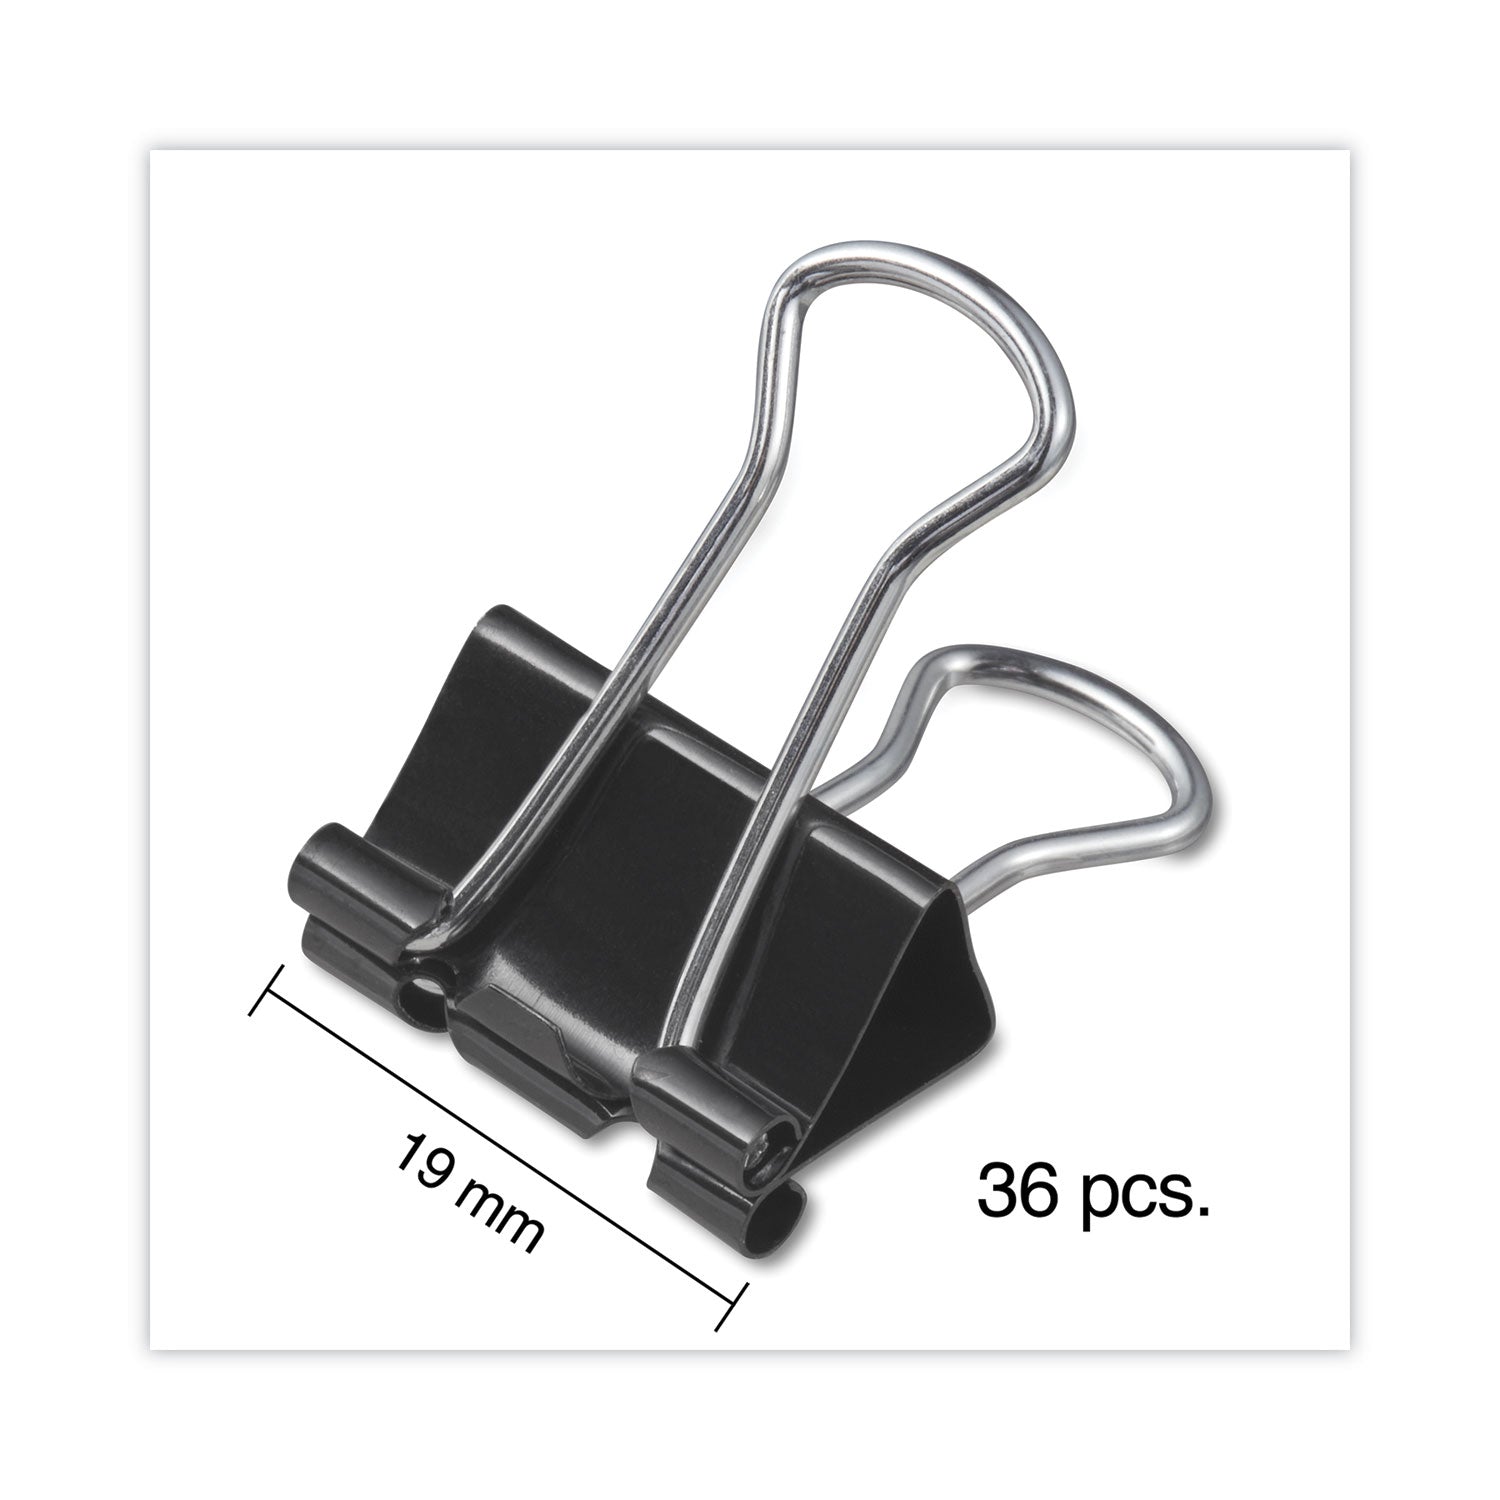 binder-clips-value-pack-small-black-silver-36-box_unv10200vp3 - 5